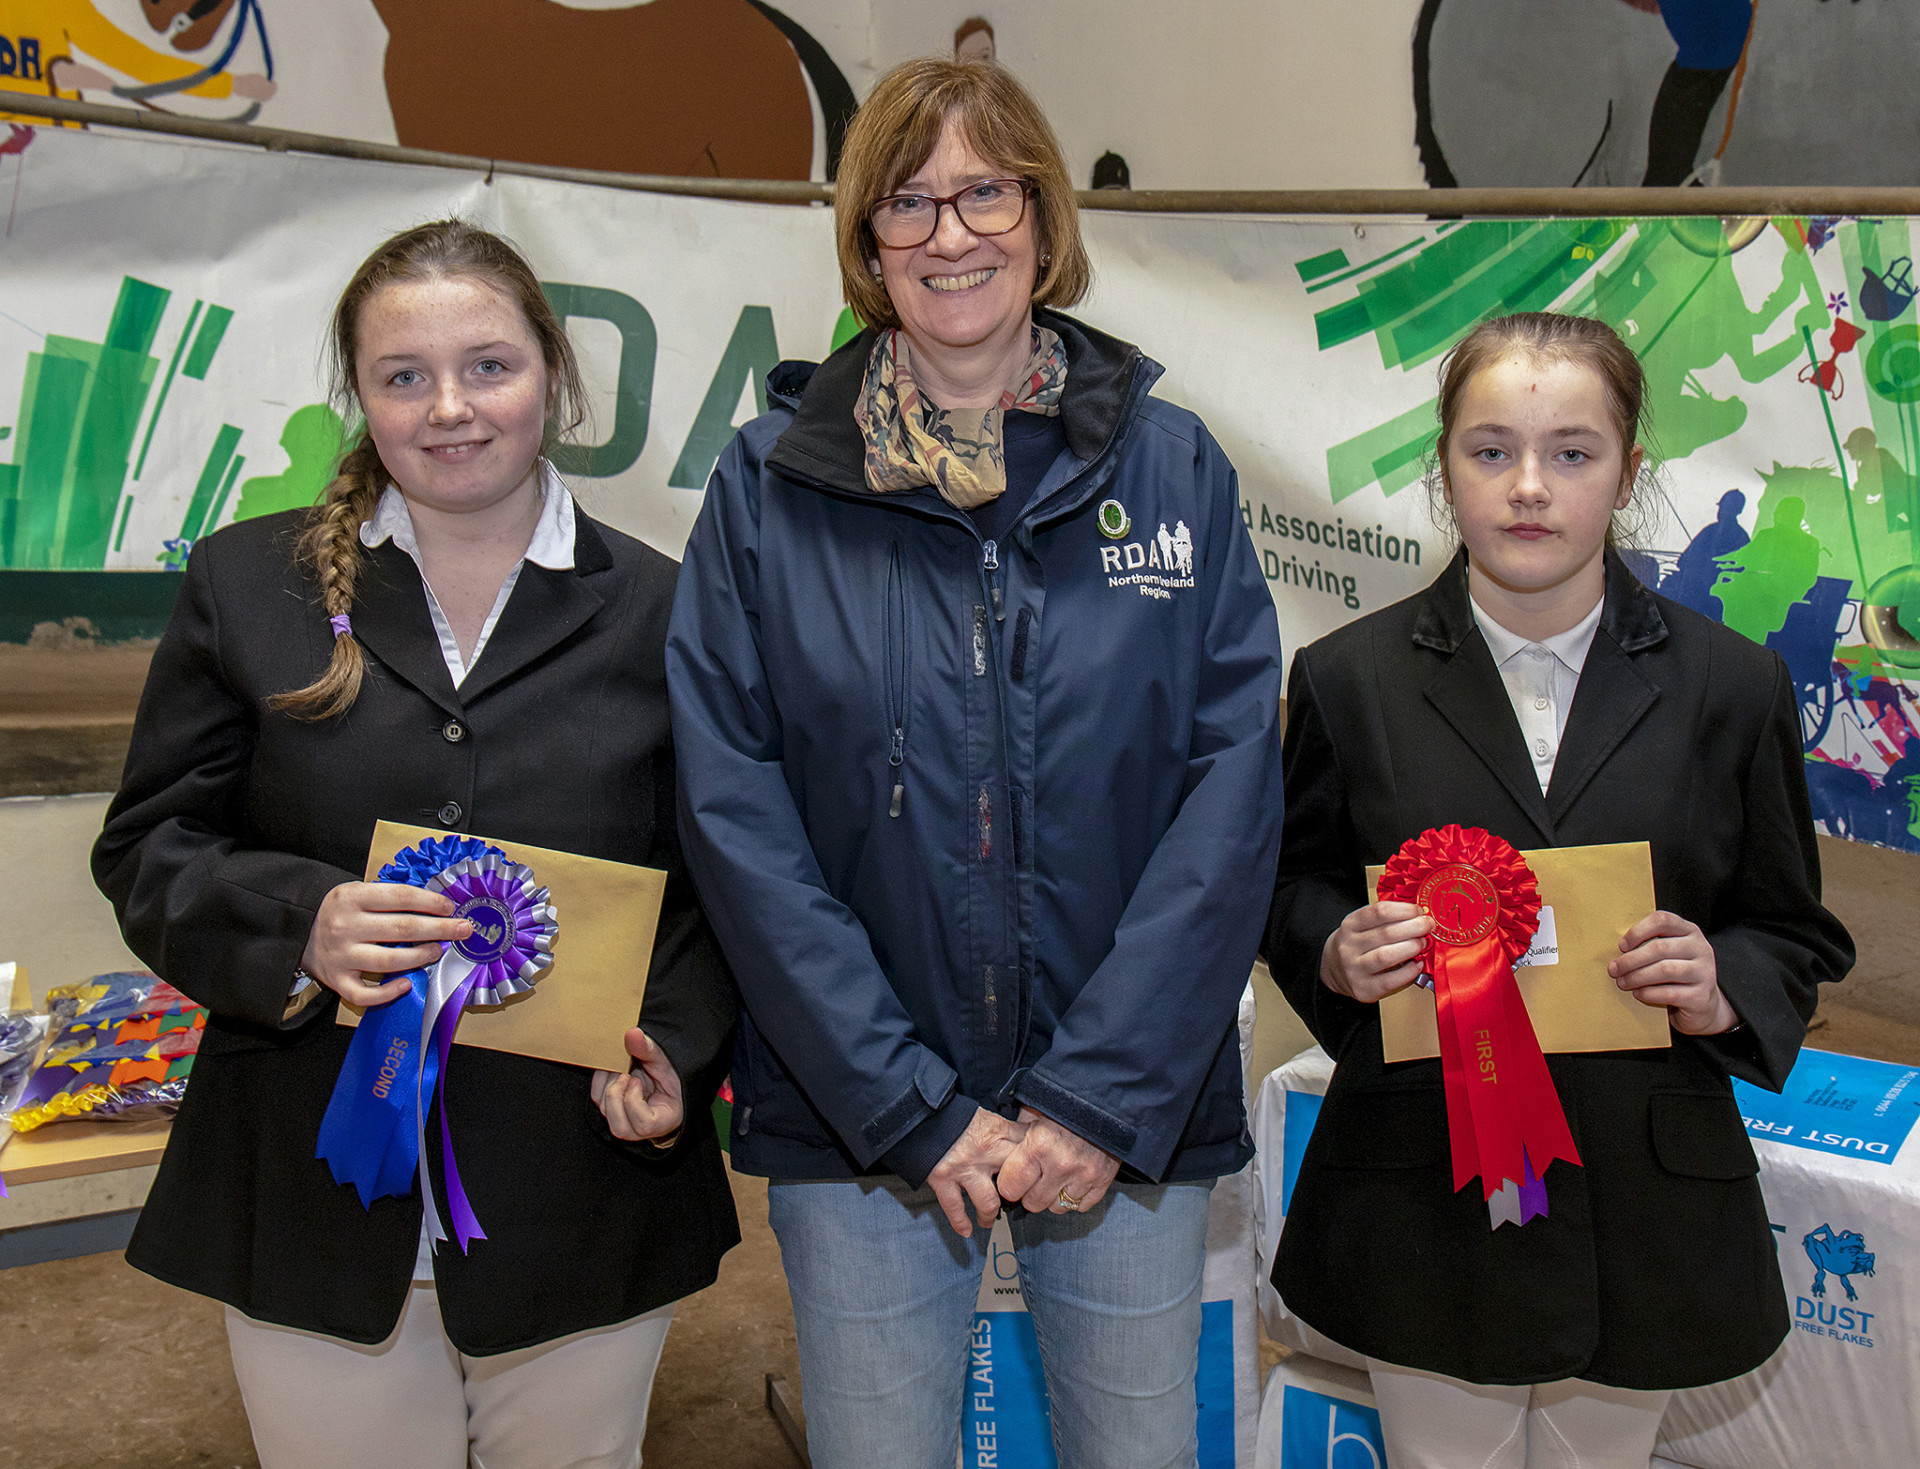 Countryside Challenge winner Brooke is counting down the days to Hartpury trip